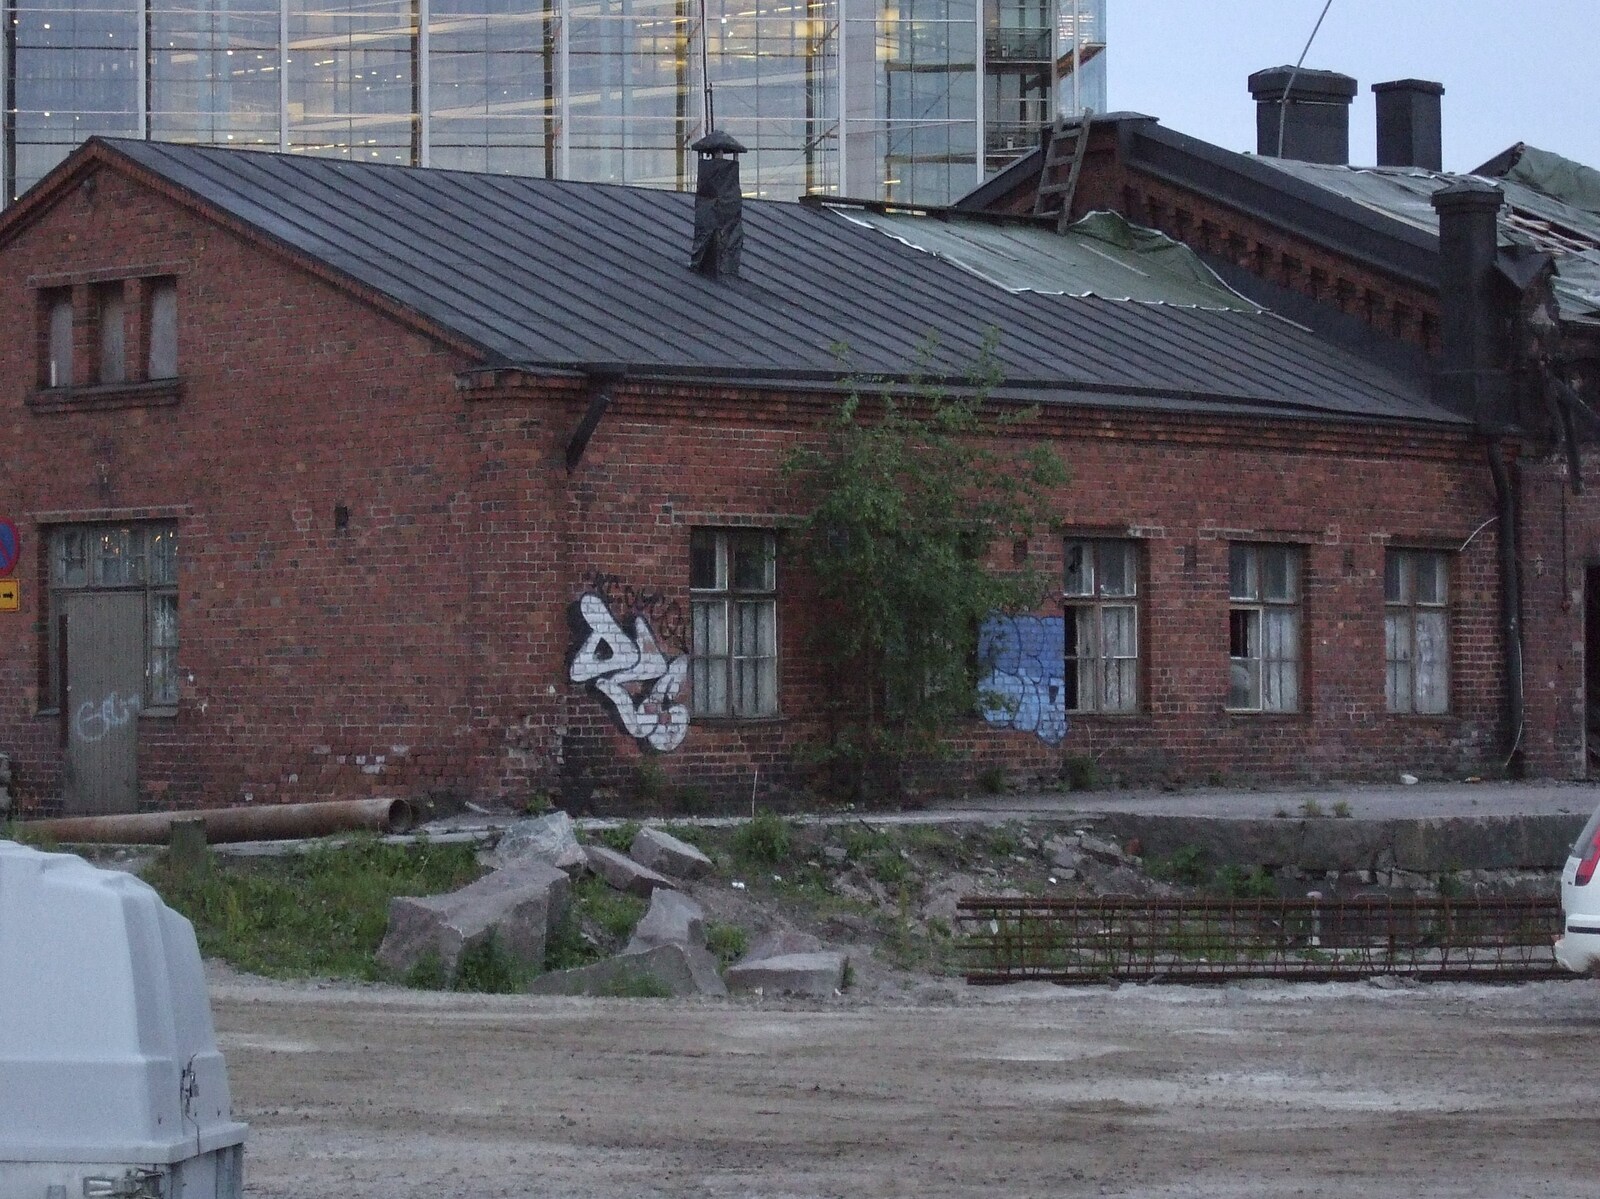 Genesis in Concert, and Suomenlinna, Helsinki, Finland - 11th June 2007: Derelict building near the gig